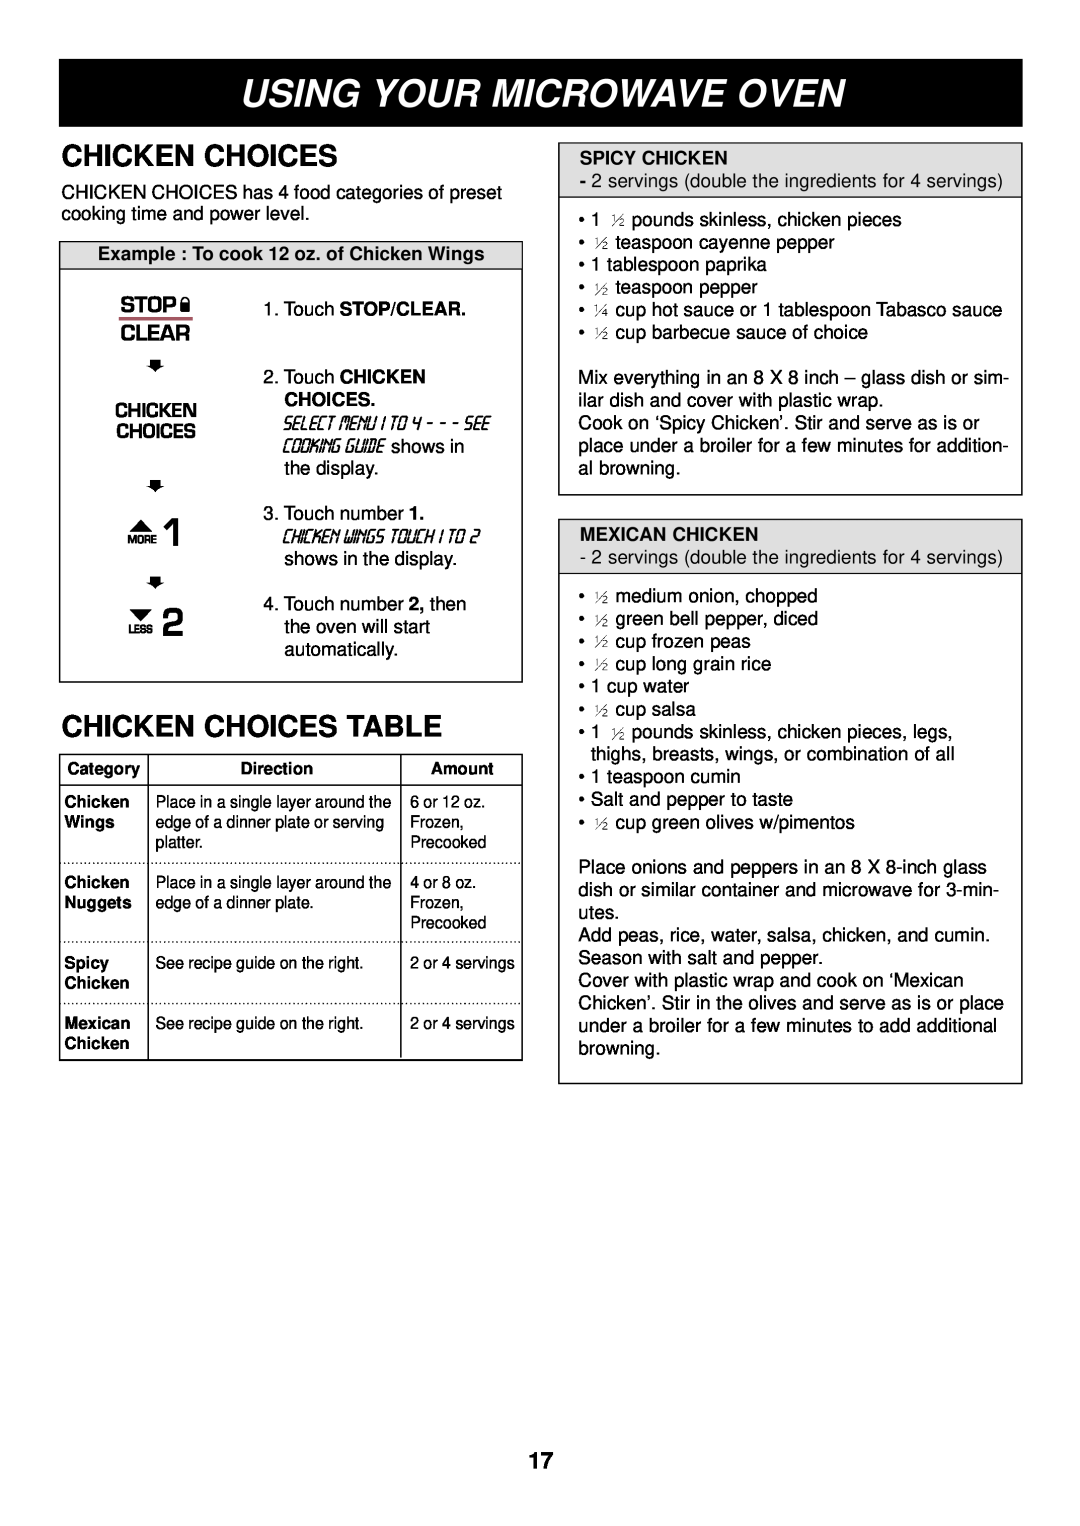 LG Electronics LRM1250B manual Chicken Choices Table, Using Your Microwave Oven, Touch CHICKEN CHOICES, Spicy Chicken 